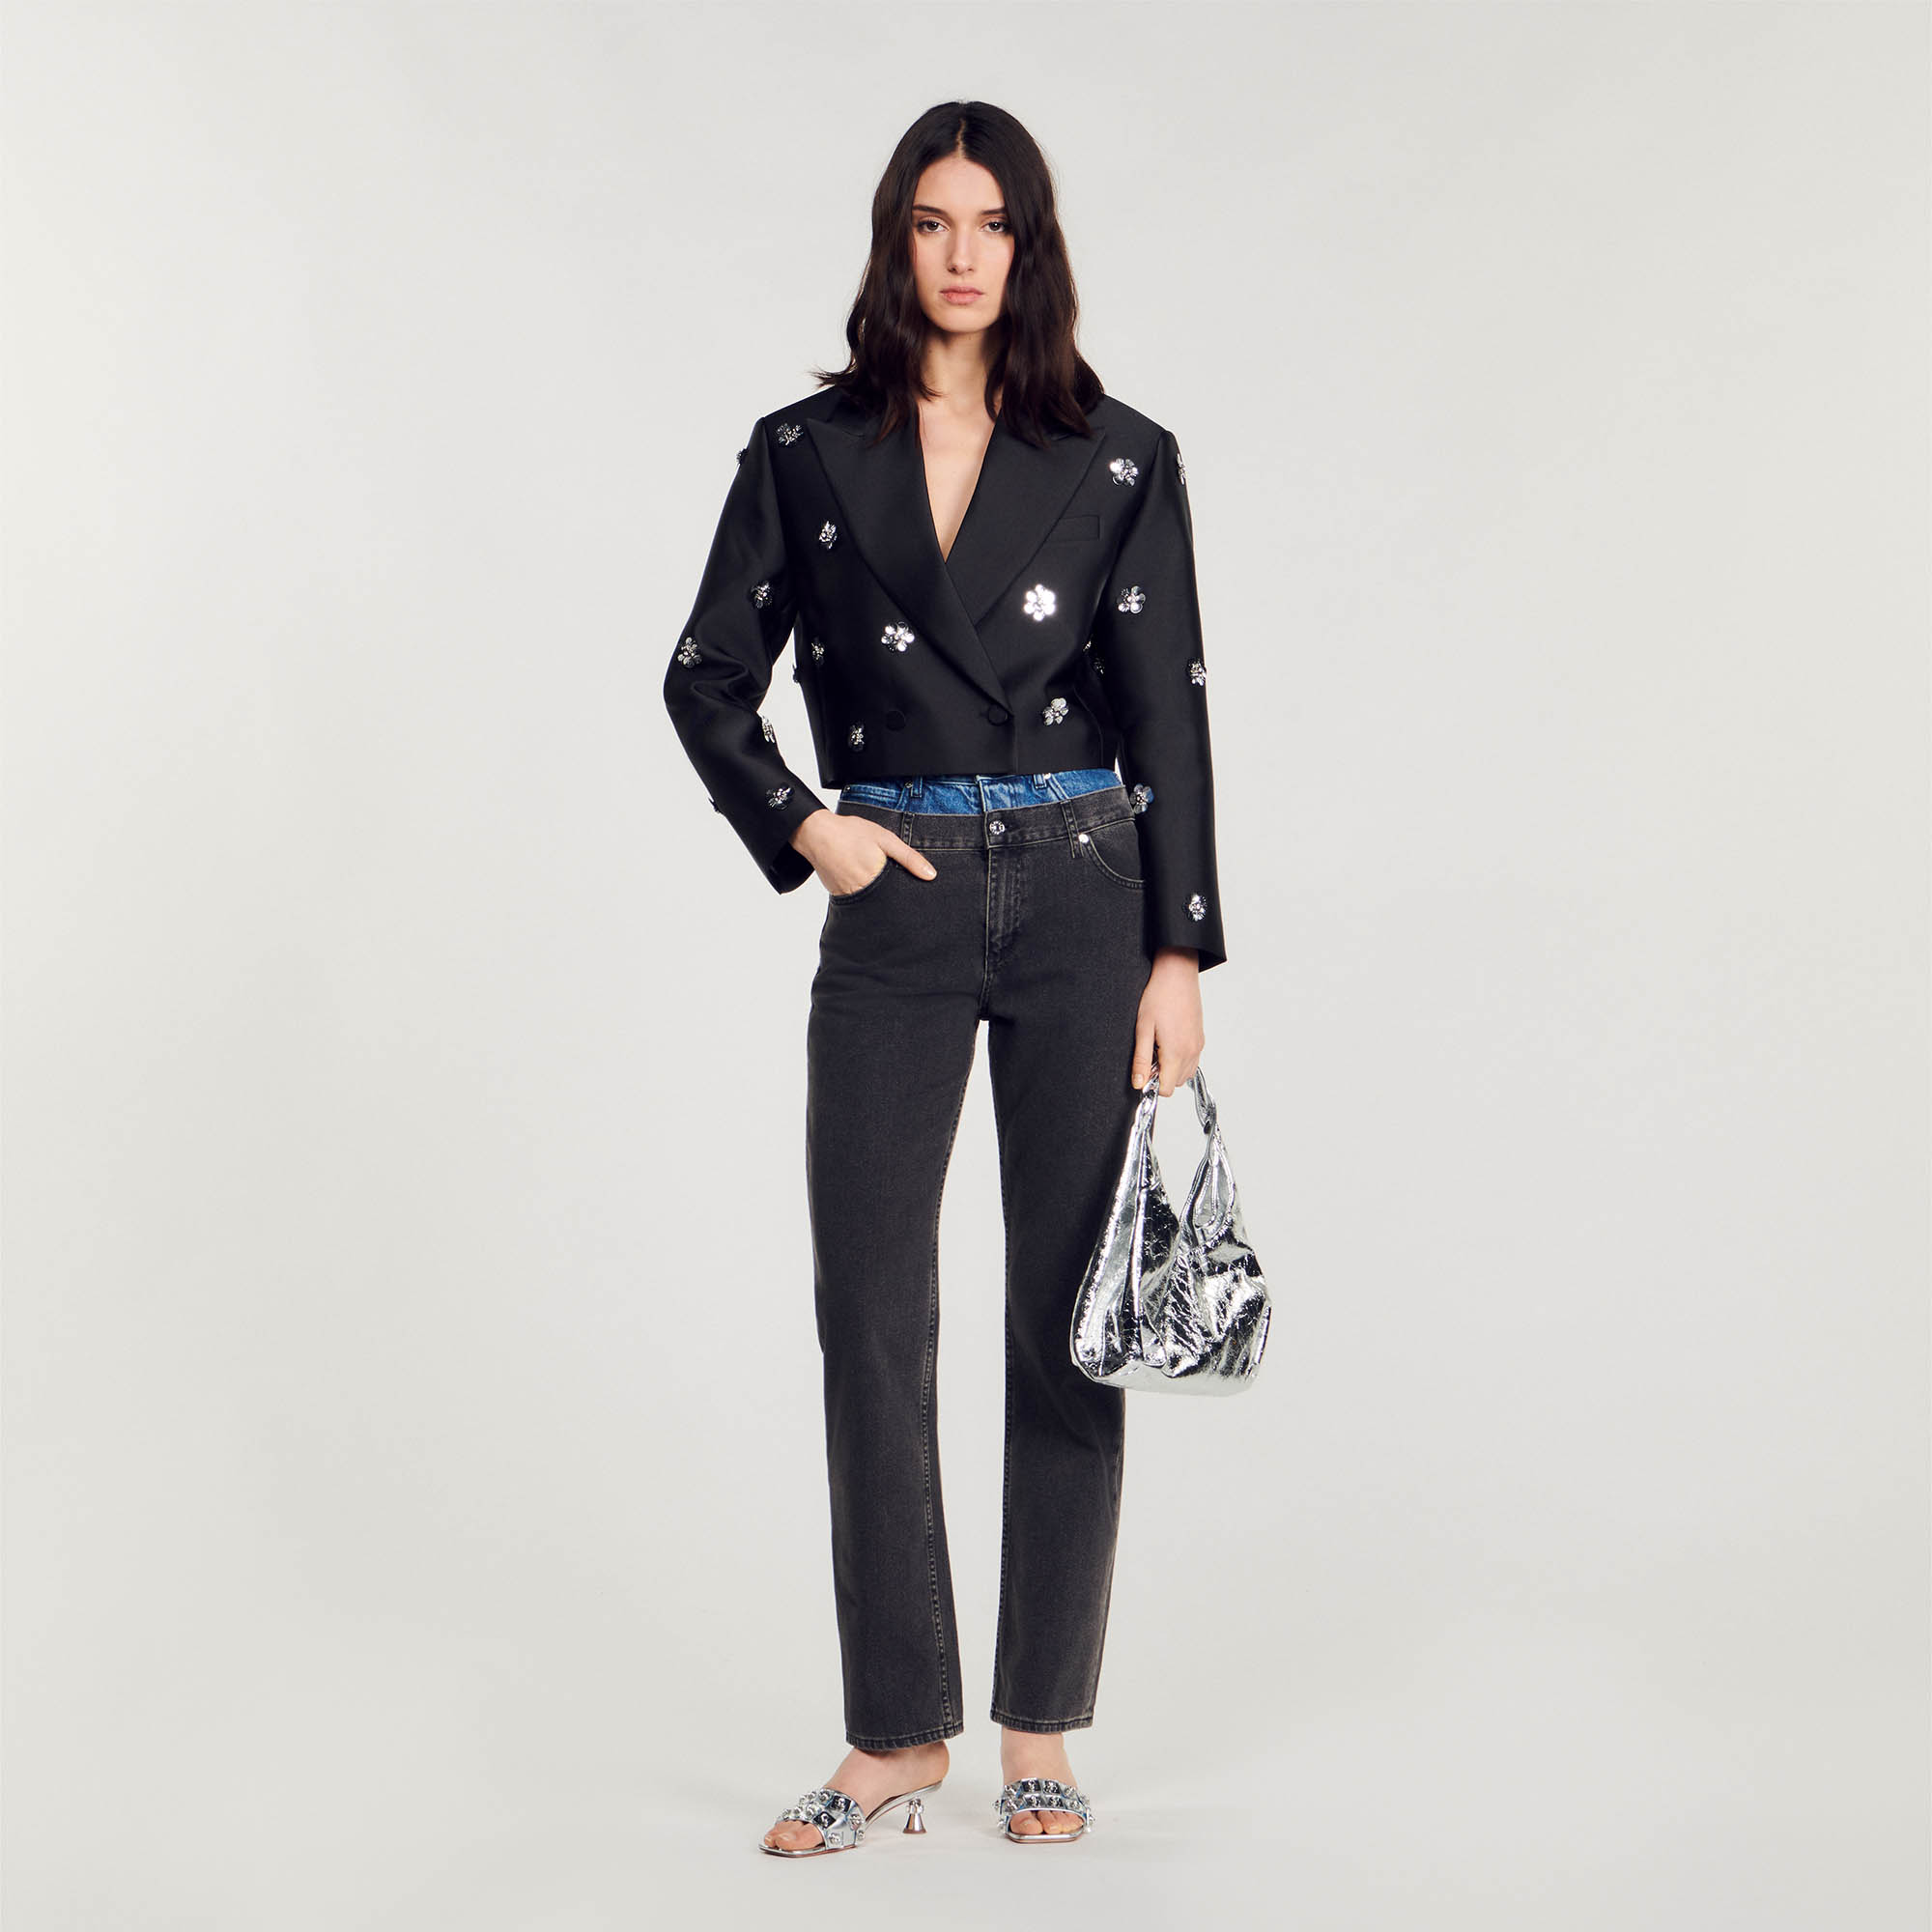 Sandro polyester Lining: Oversized satin-effect short-sleeved jacket featuring a wide lapel collar, a double-breasted fastening with covered buttons, long sleeves and embellished with embroidered flowers